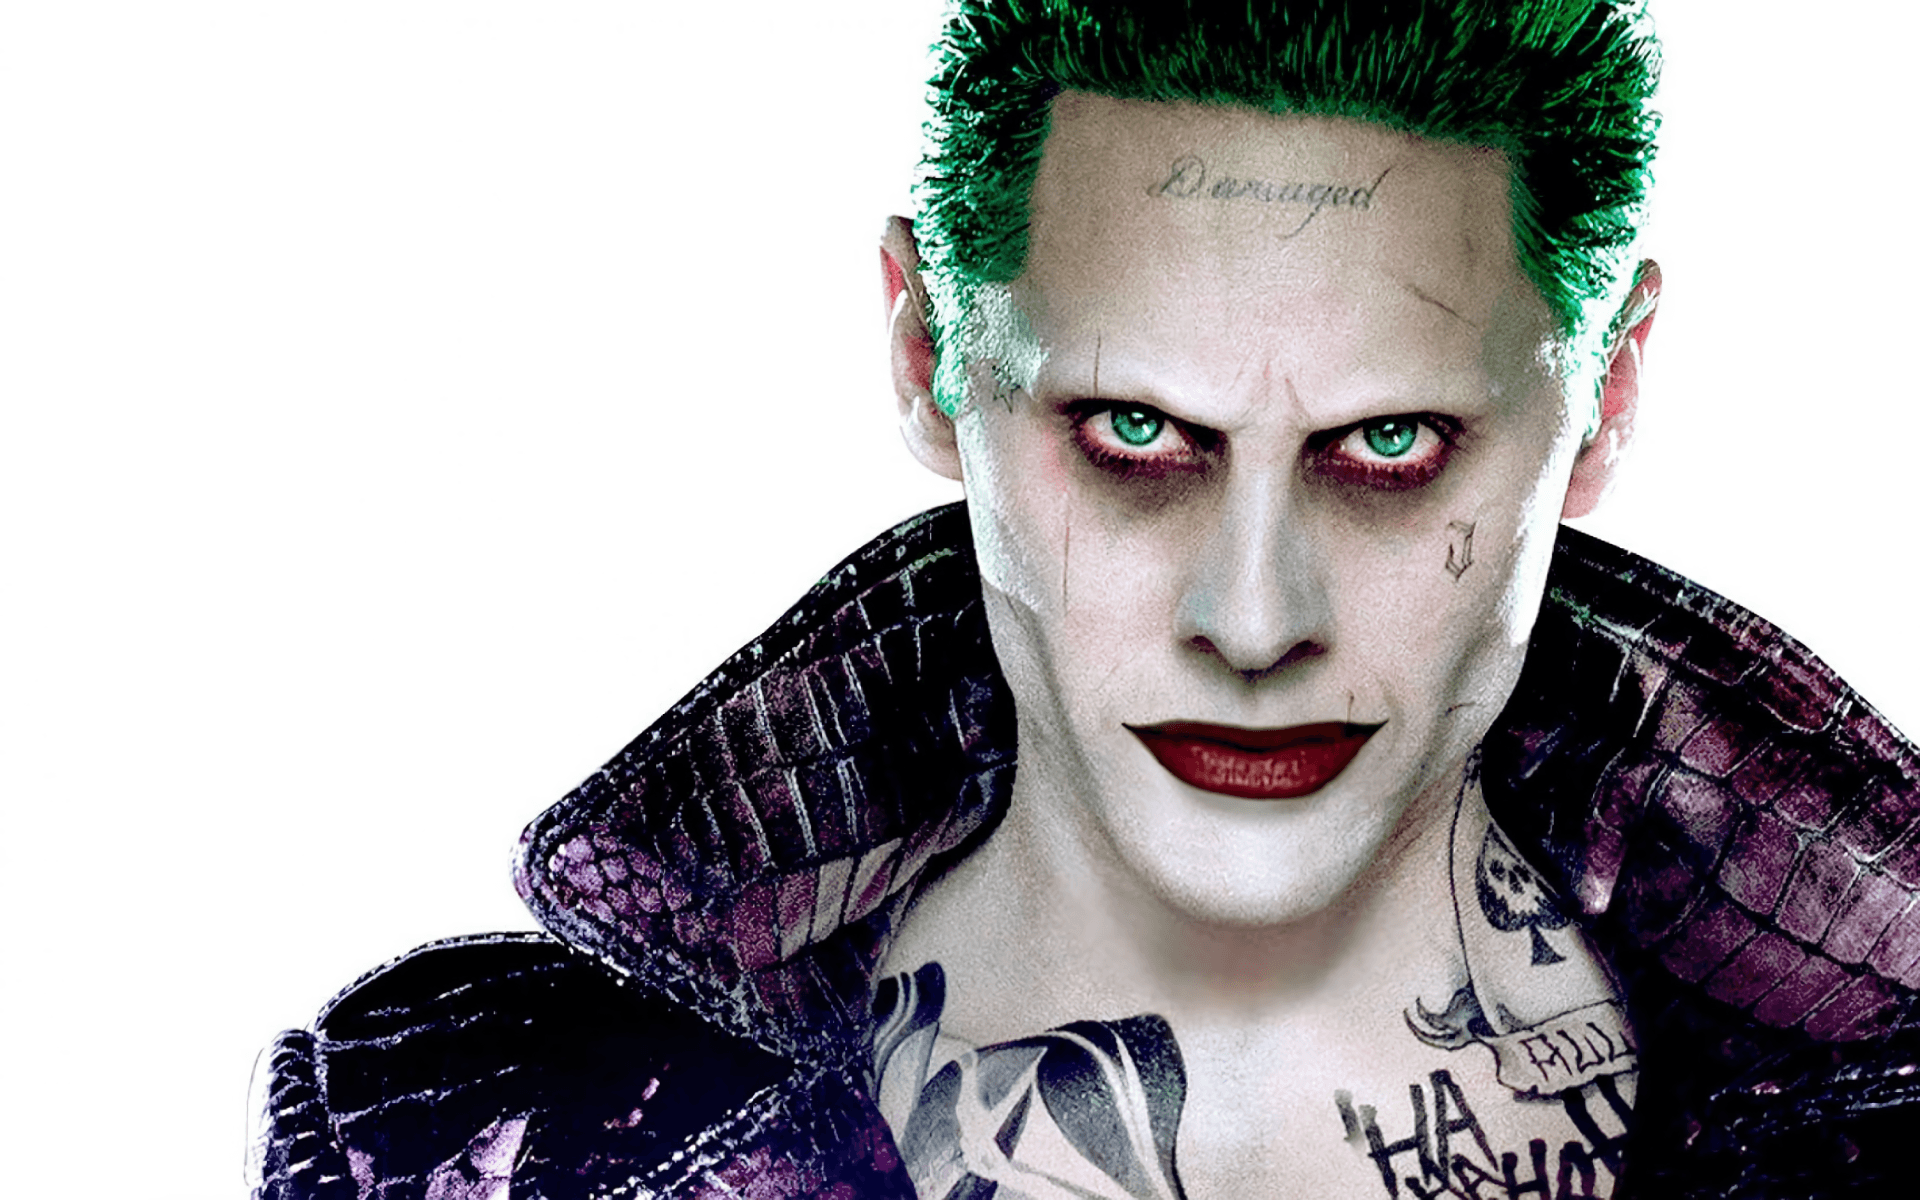 Jared Leto as The Joker Full HD Wallpapers and Backgrounds Image.